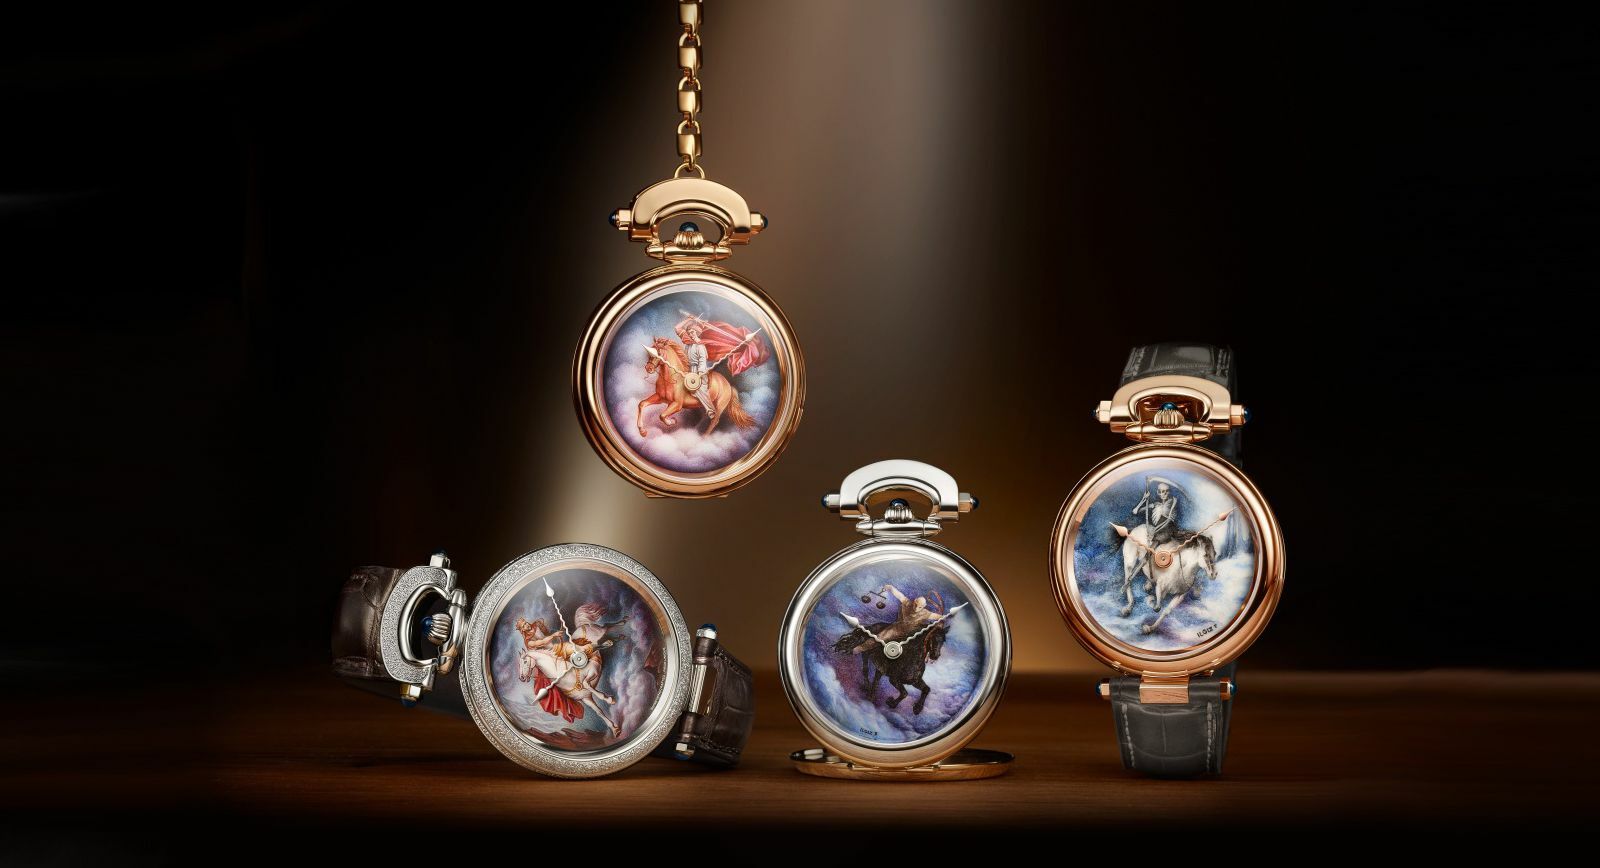 Jewellery designer Ilgiz F. and watchmakers Bovet 1822 come together to create a series of unique painted enamel watches